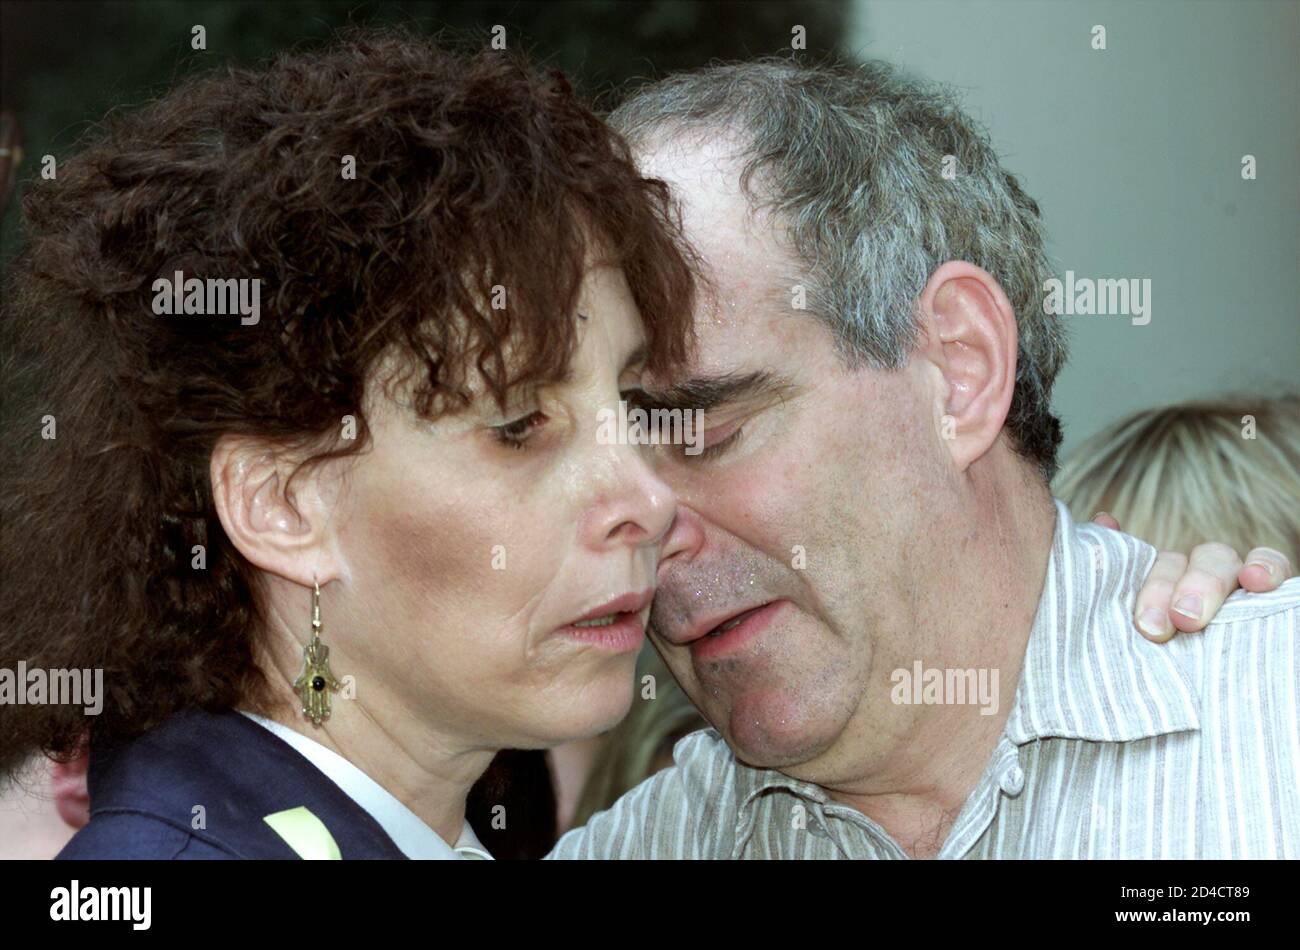 Susan and Robert Levy, parents of Chandra Levy, listen during a press  conference with Washington attorney Billy Martin (not shown) in Washington,  June 21, 2001. Martin announced that a team of investigators